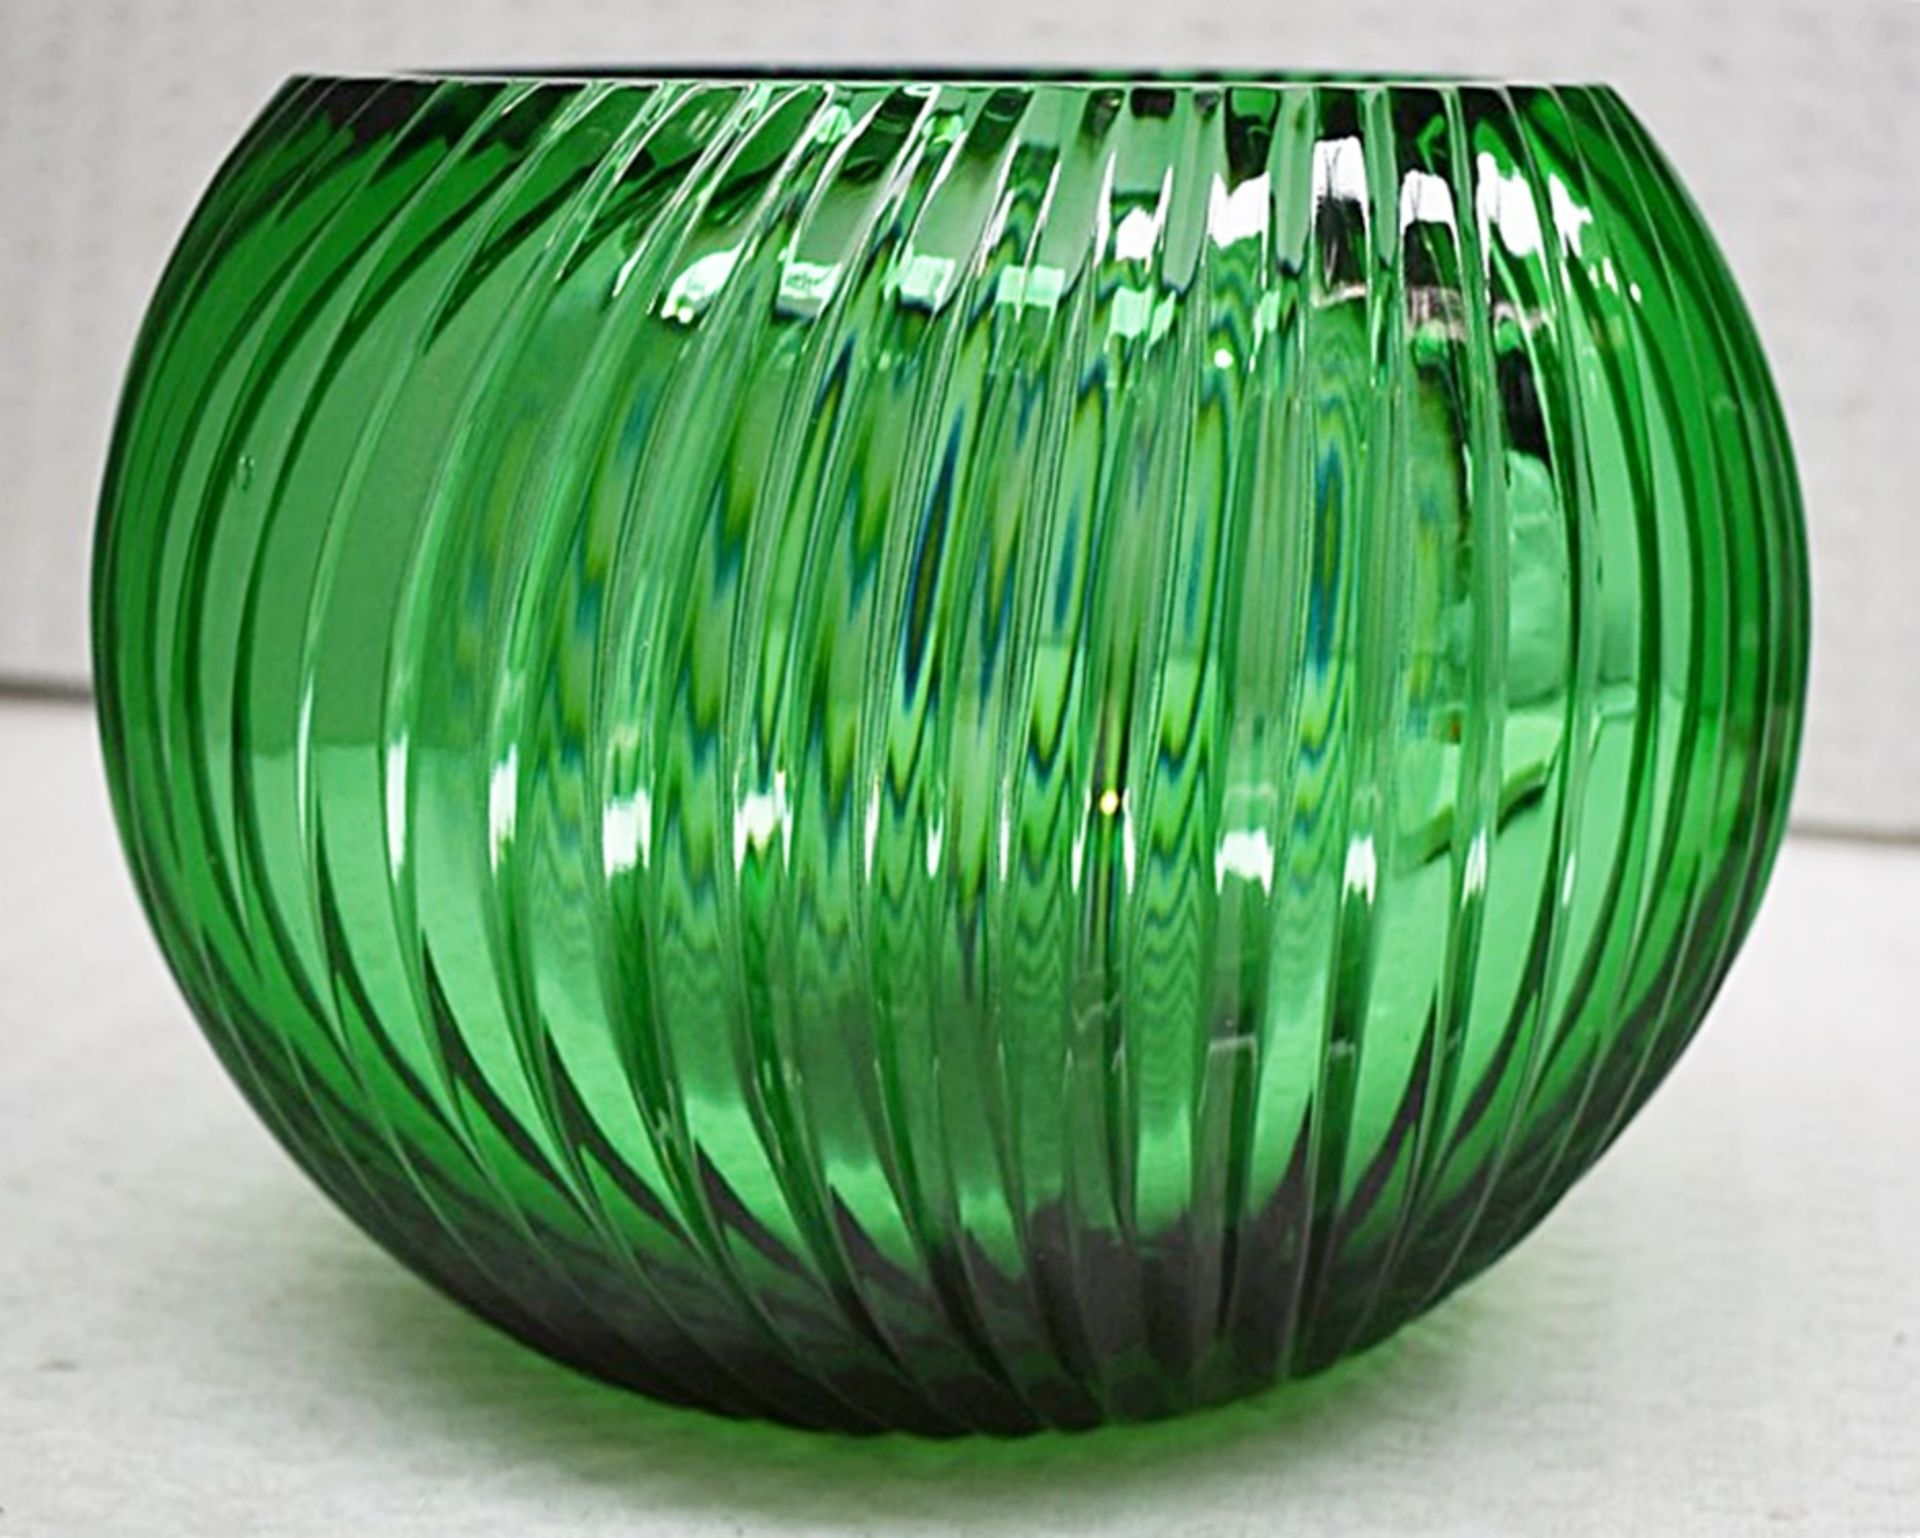 1 x BALDI 'Home Jewels' Italian Hand-crafted Artisan Crystal Bowl In Green - Dimensions: Height 15cm - Image 3 of 4